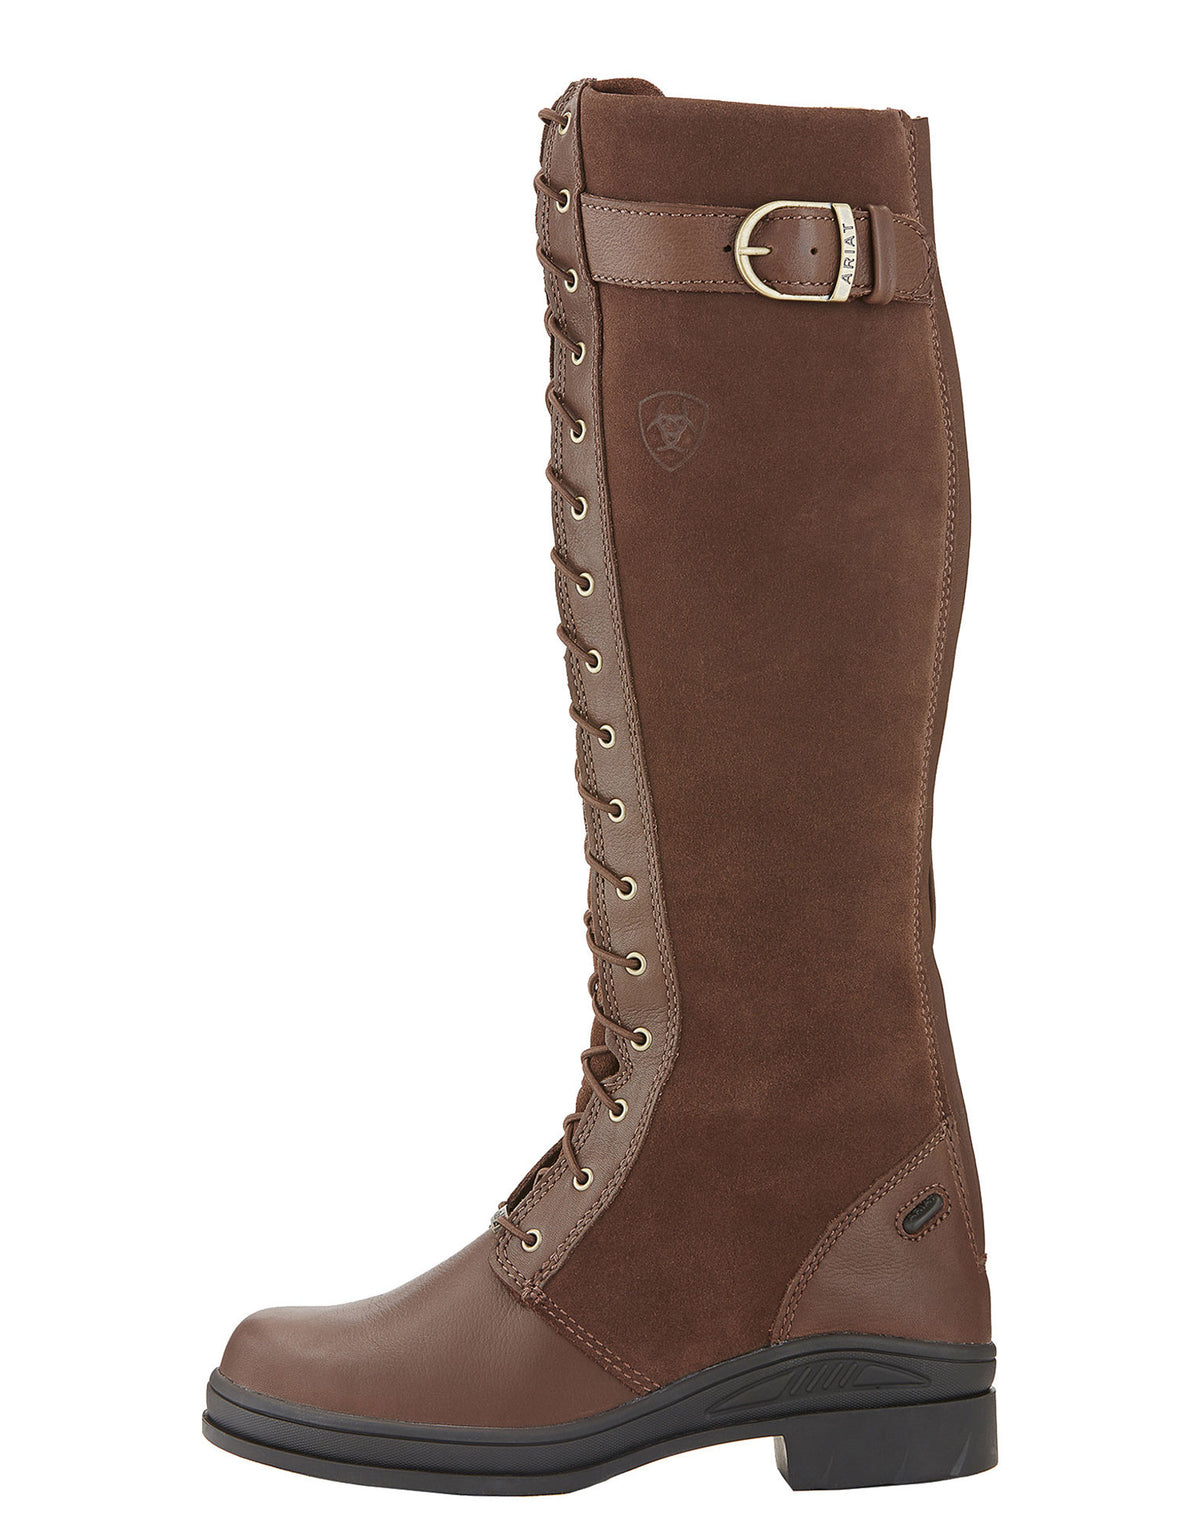 Ariat Coniston Waterproof Insulated Boots | Chocolate